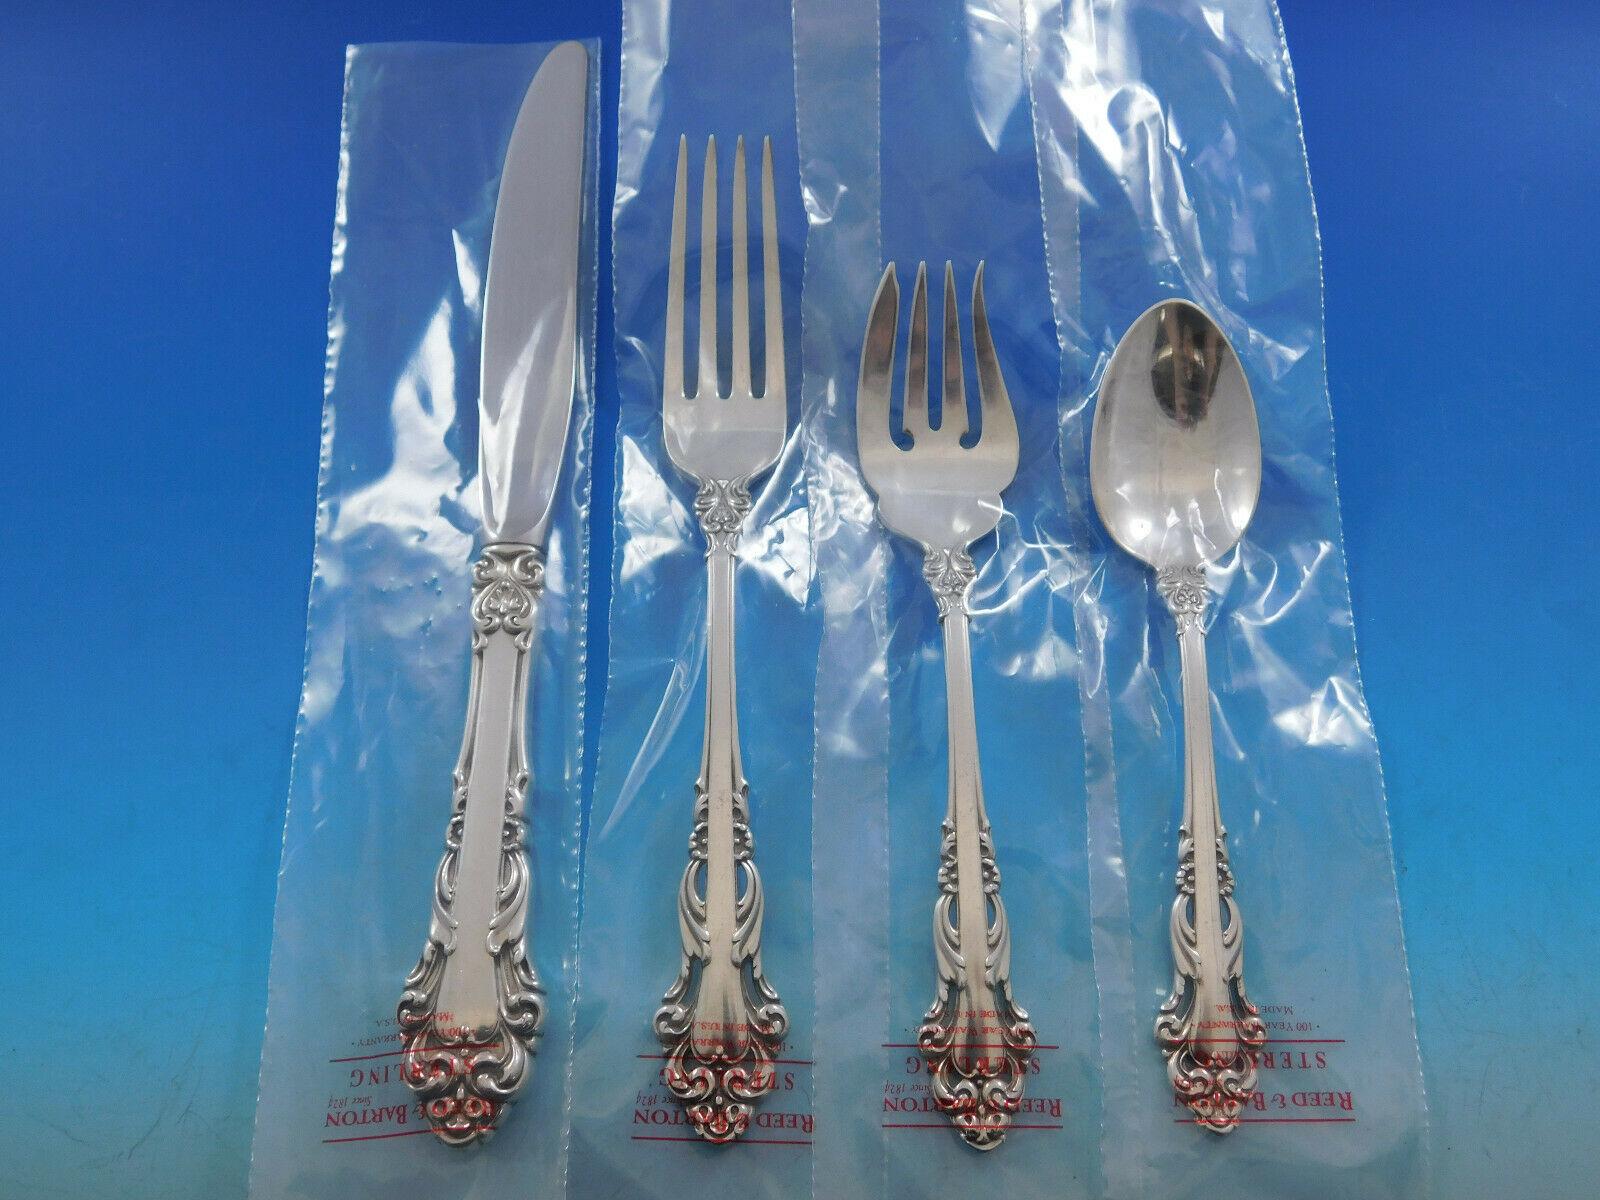 New, unused Grande Renaissance by Reed & Barton Sterling Silver flatware set - 51 pieces. This set includes:

12 knives, 9